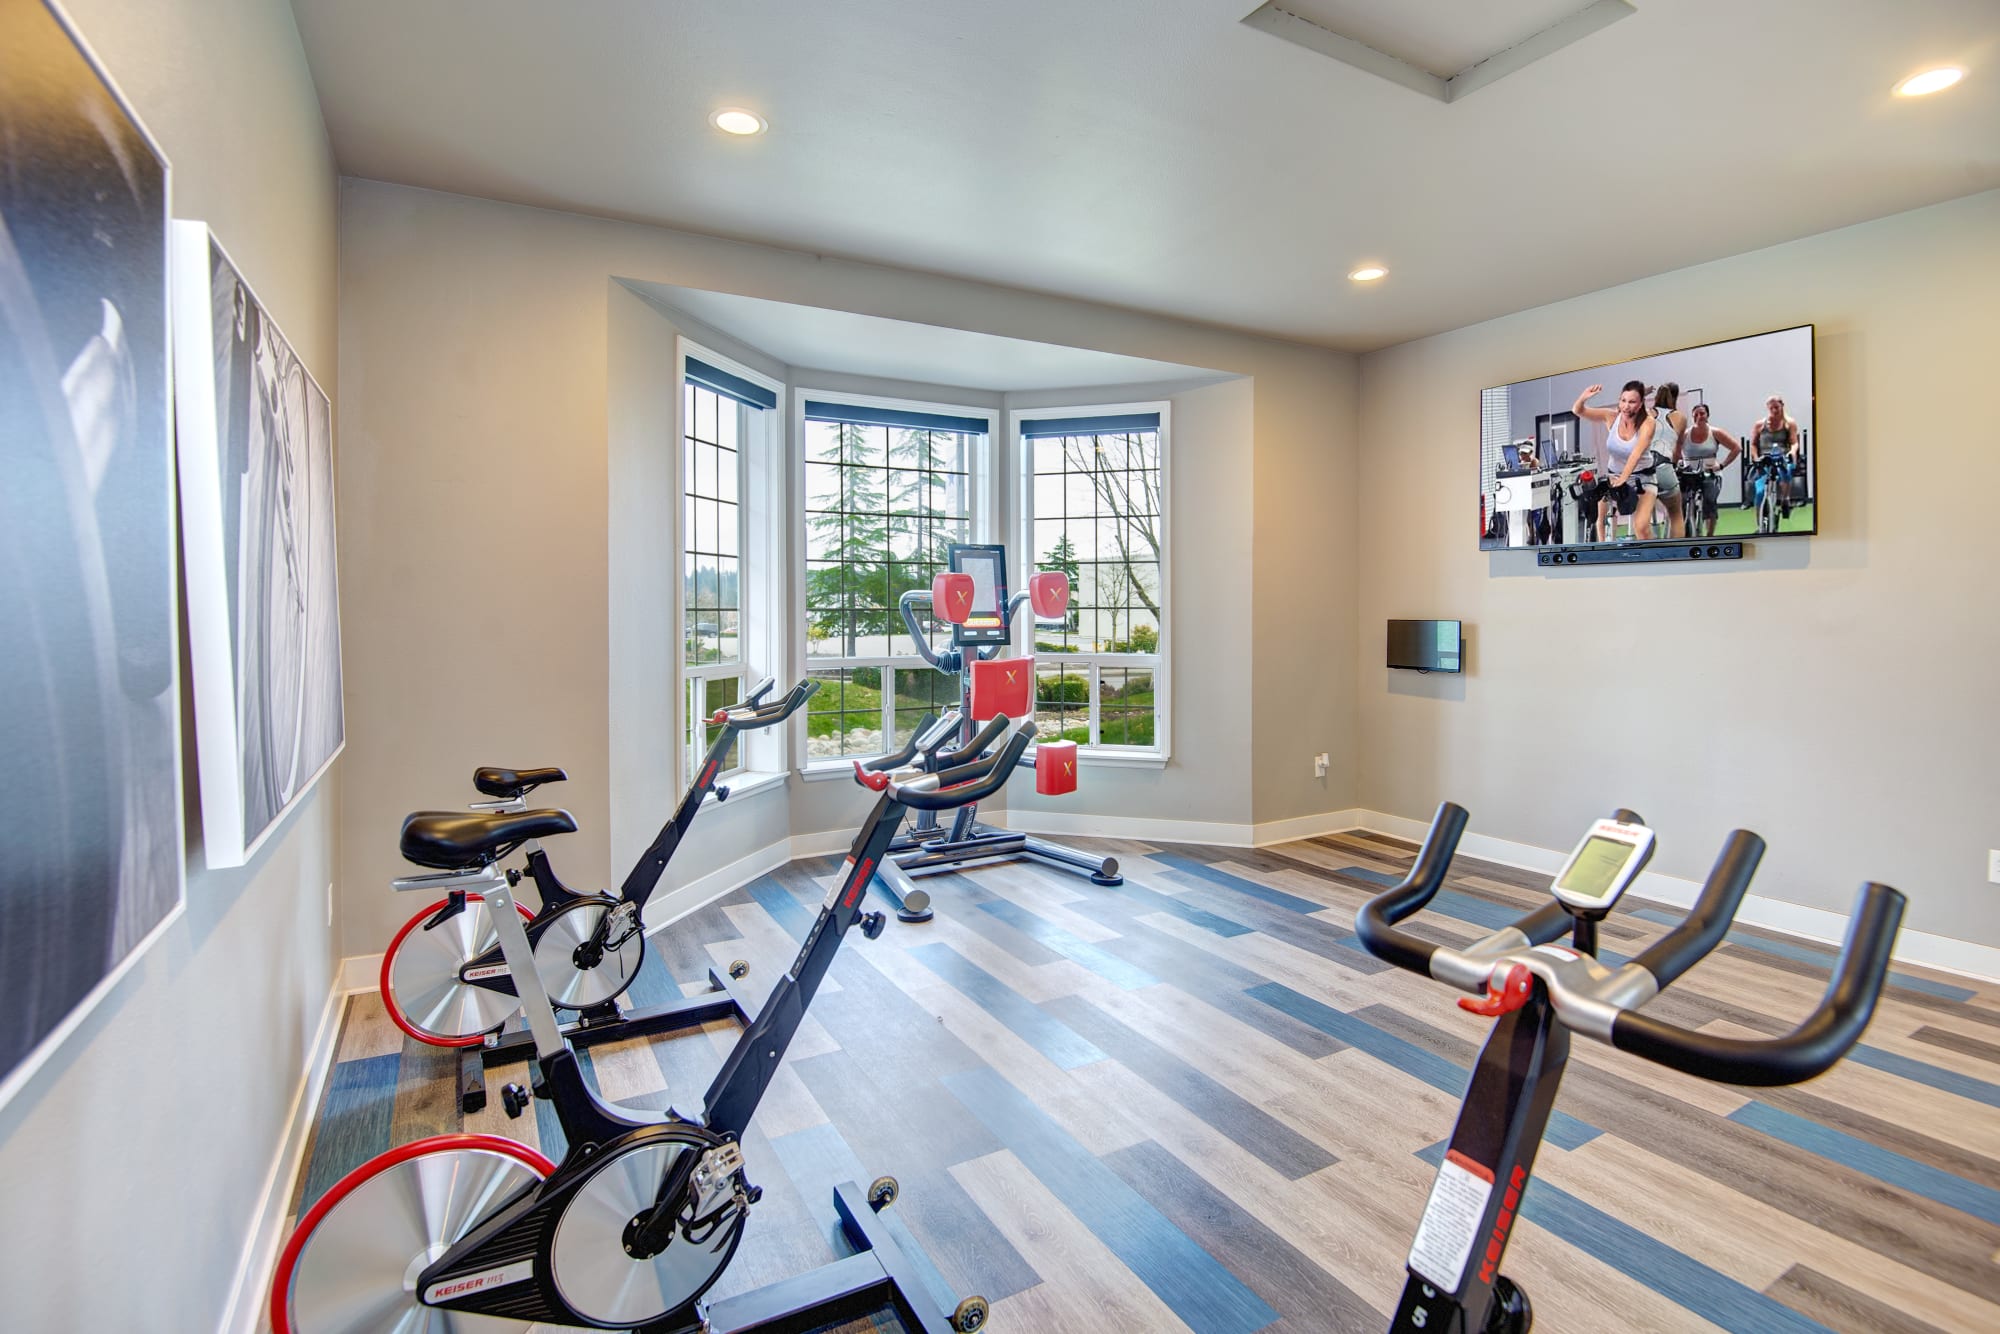 A workout room at Wellington Apartment Homes in Silverdale, Washington